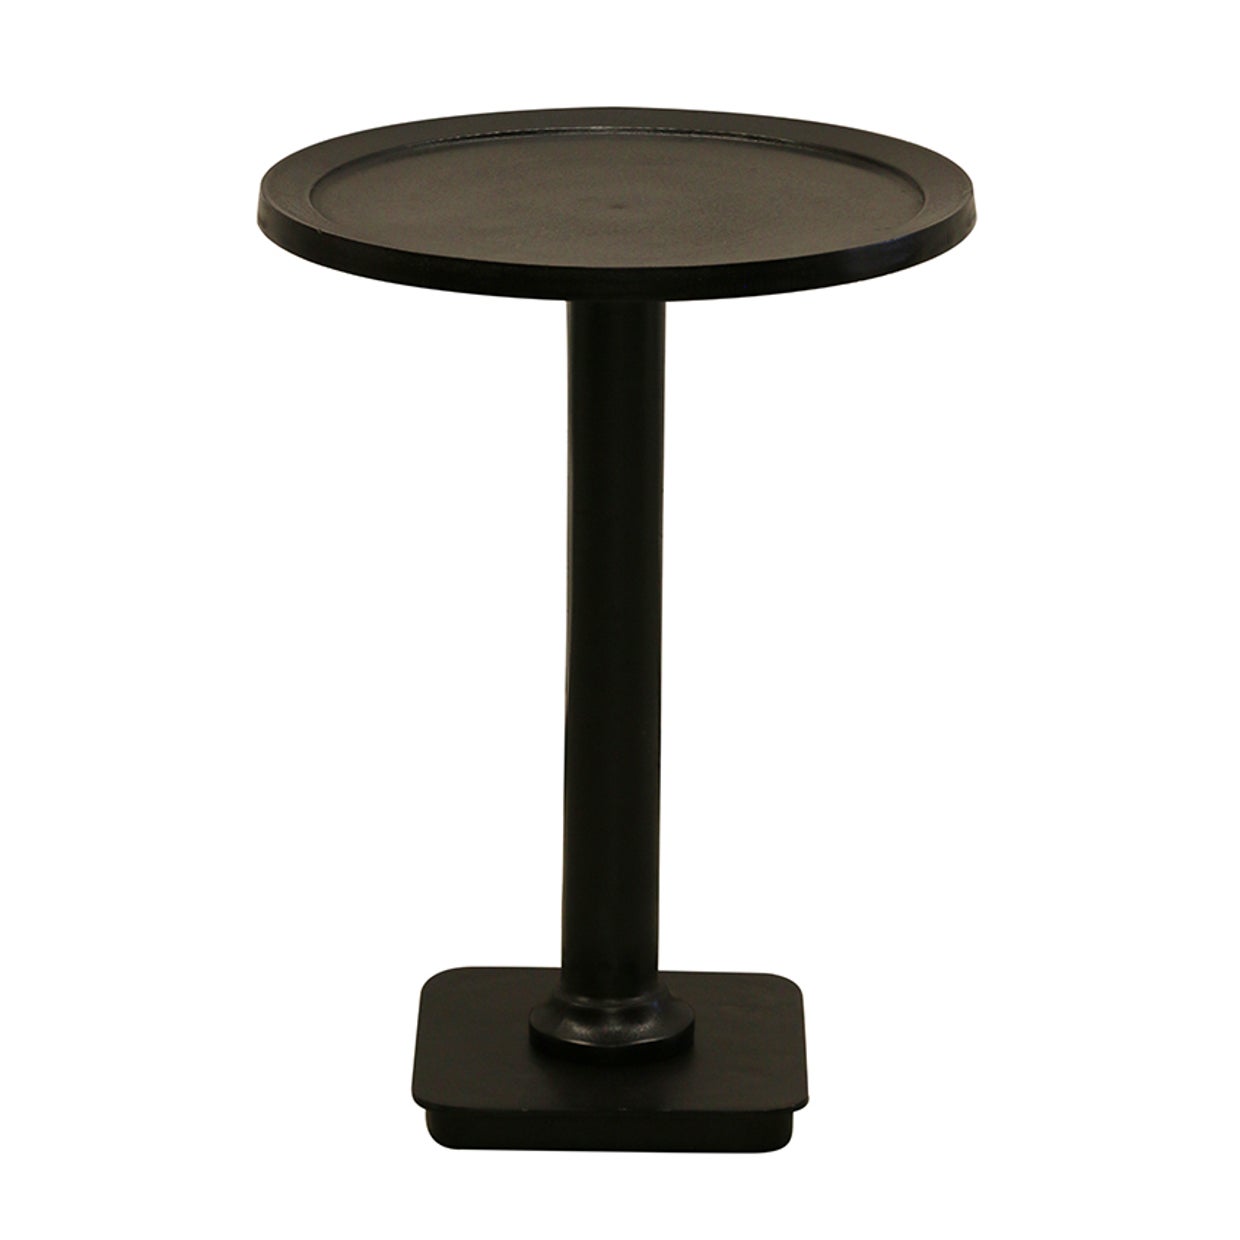 Occasional Pedestal Table in Antique Black Finish